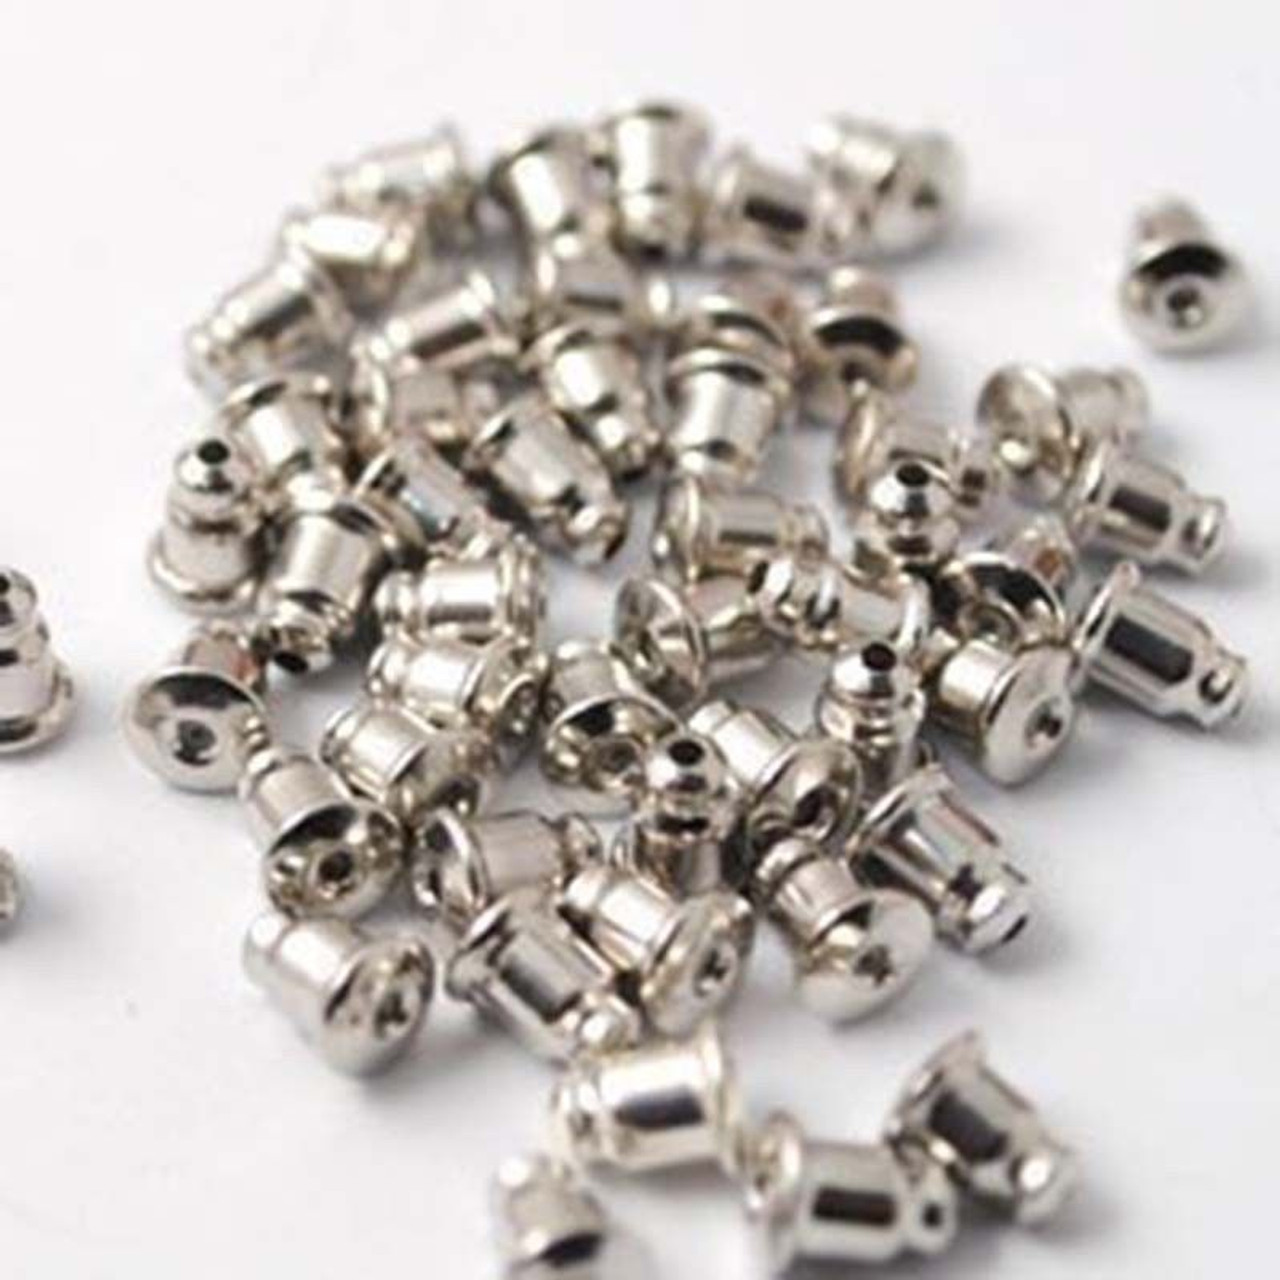 500 Pieces Bullet Earring Backs with Pad Hypoallergenic. MADE IN USA. 